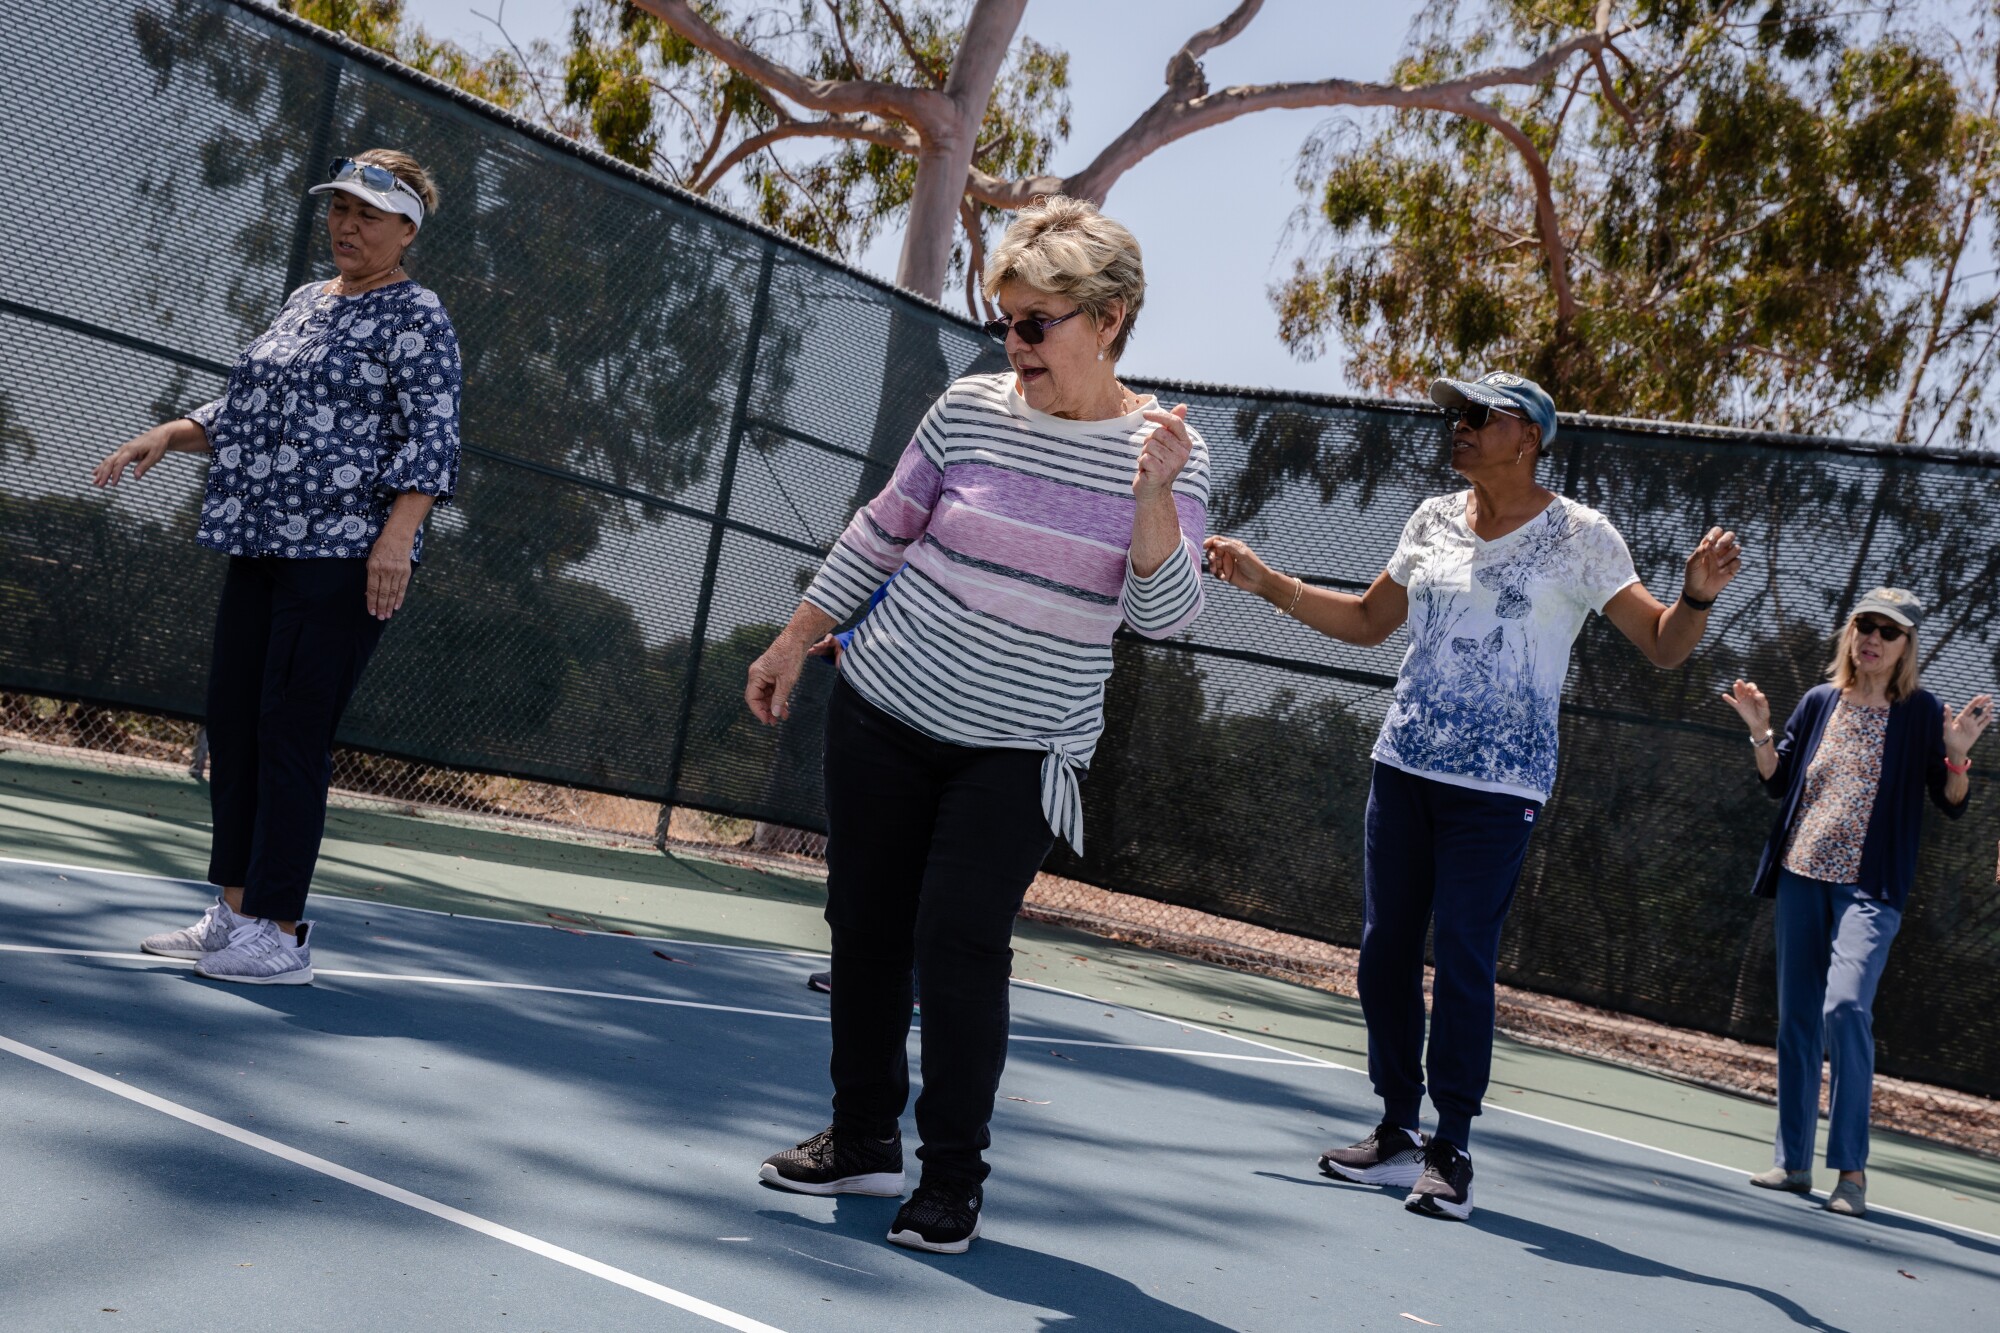 four older adults dance on a tennis court outside